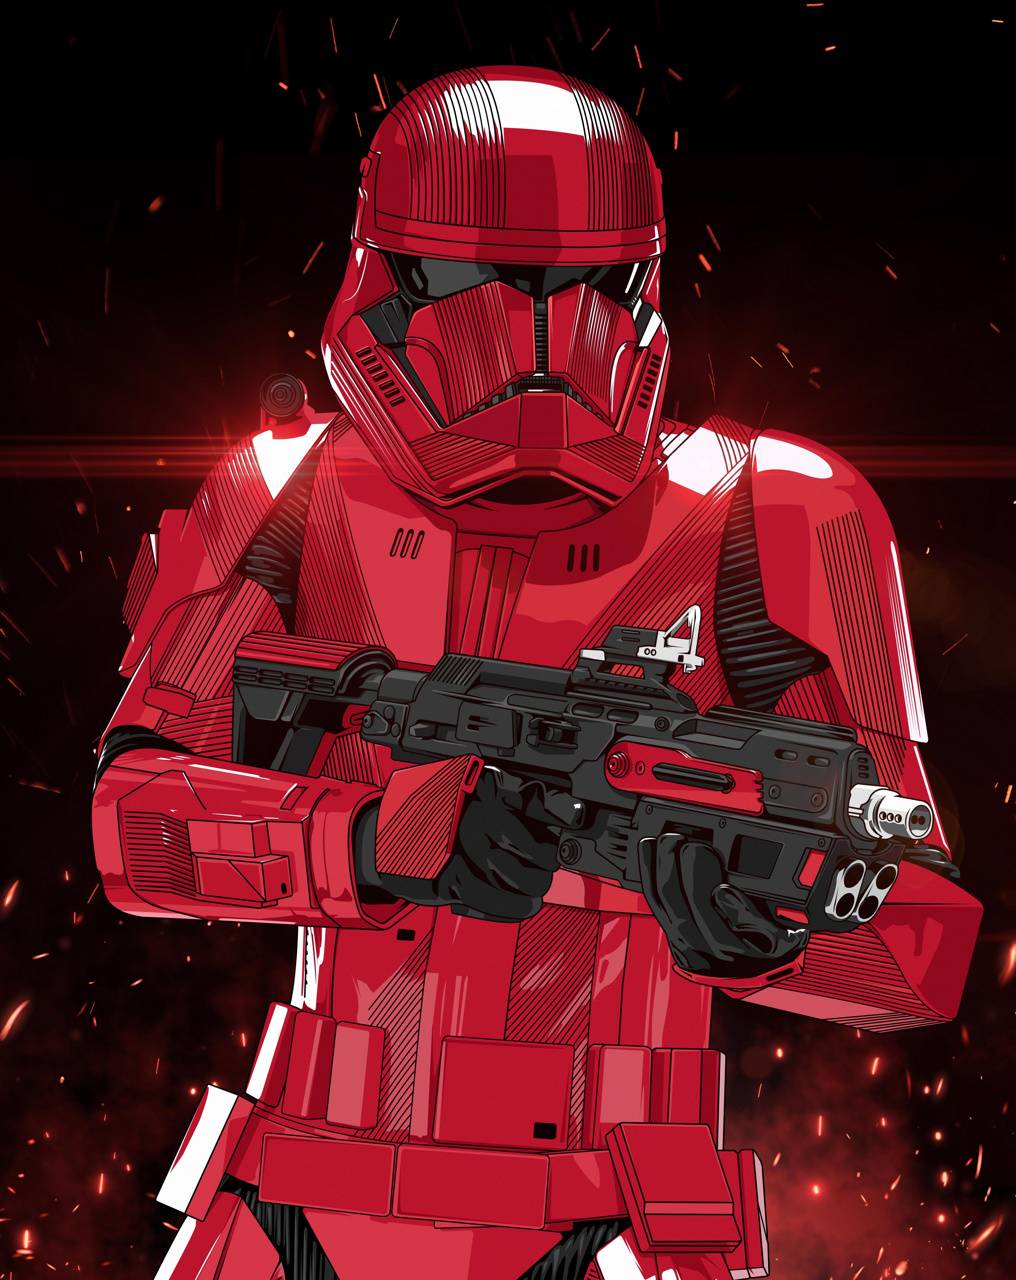 Sith Trooper Wallpapers Top Free Sith Trooper Backgrounds